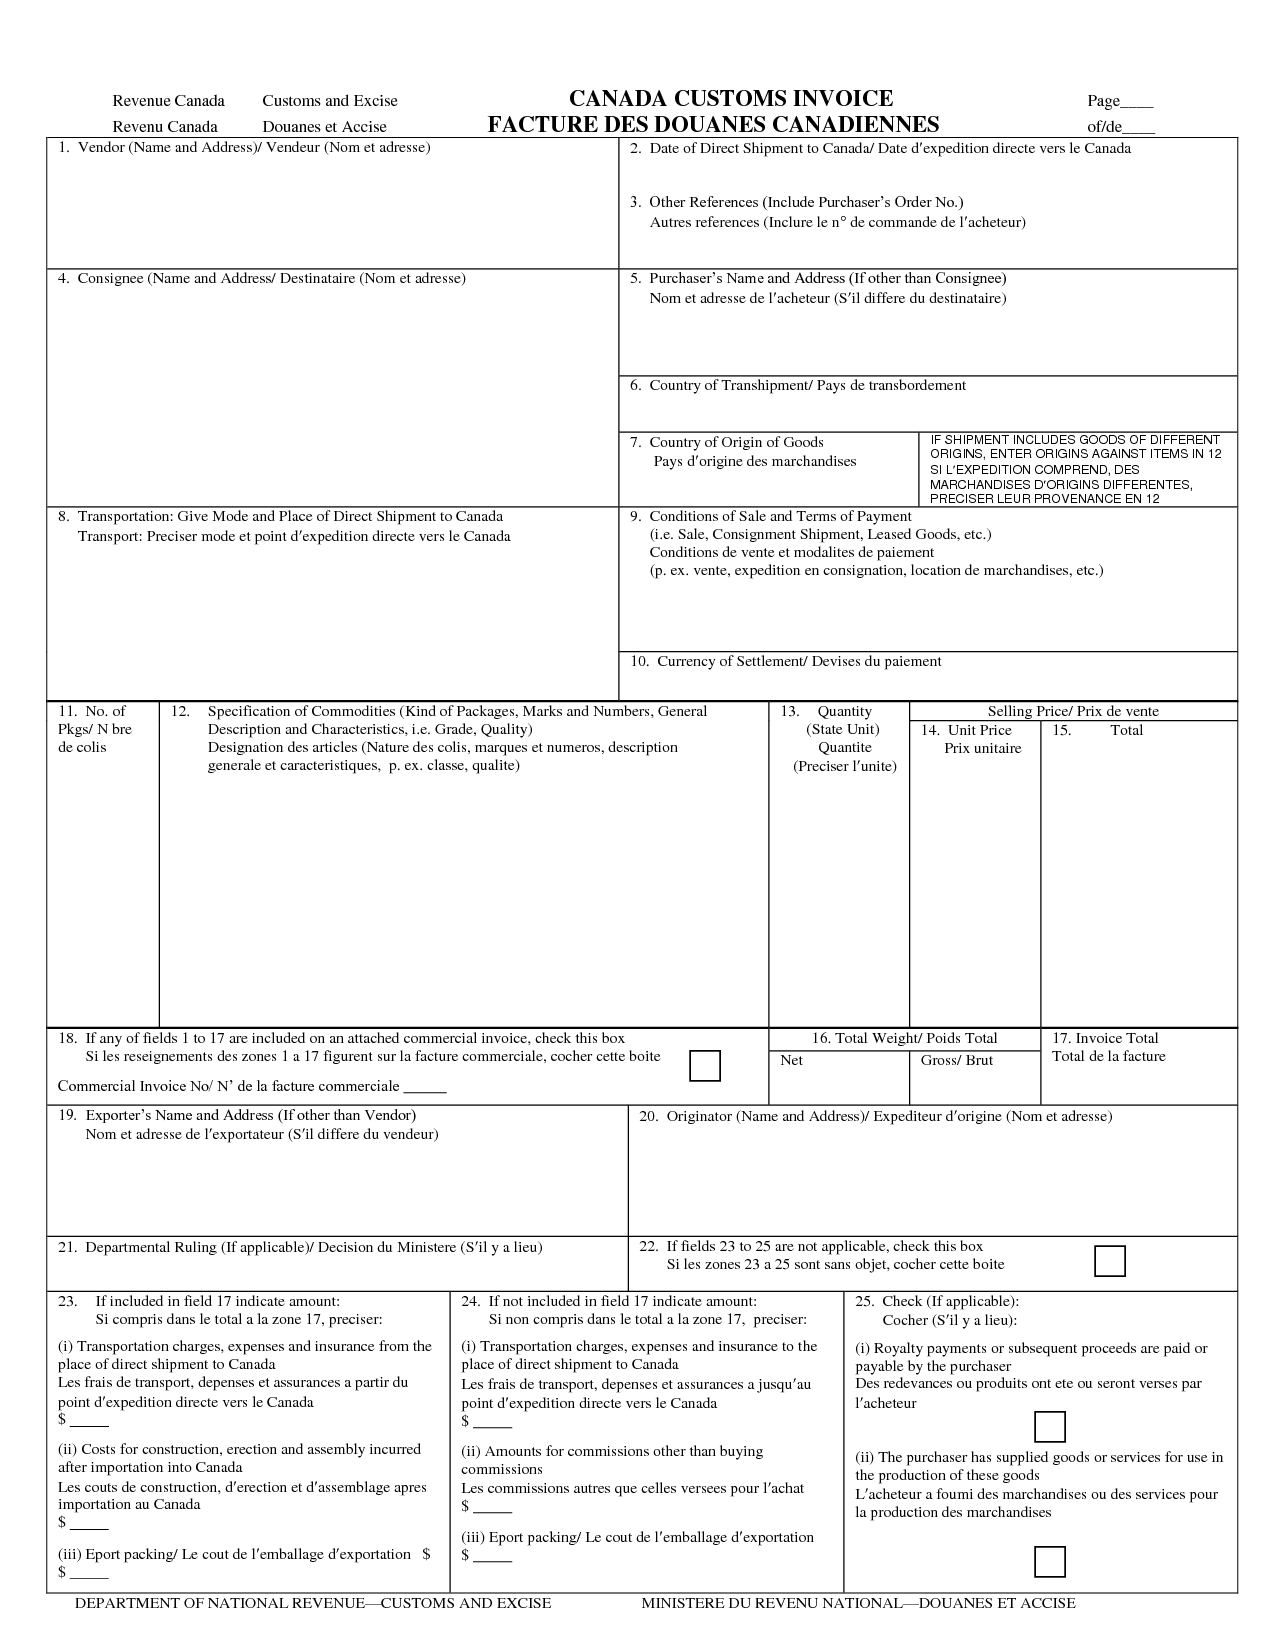 canadian customs invoice template camgigandet us customs invoice form